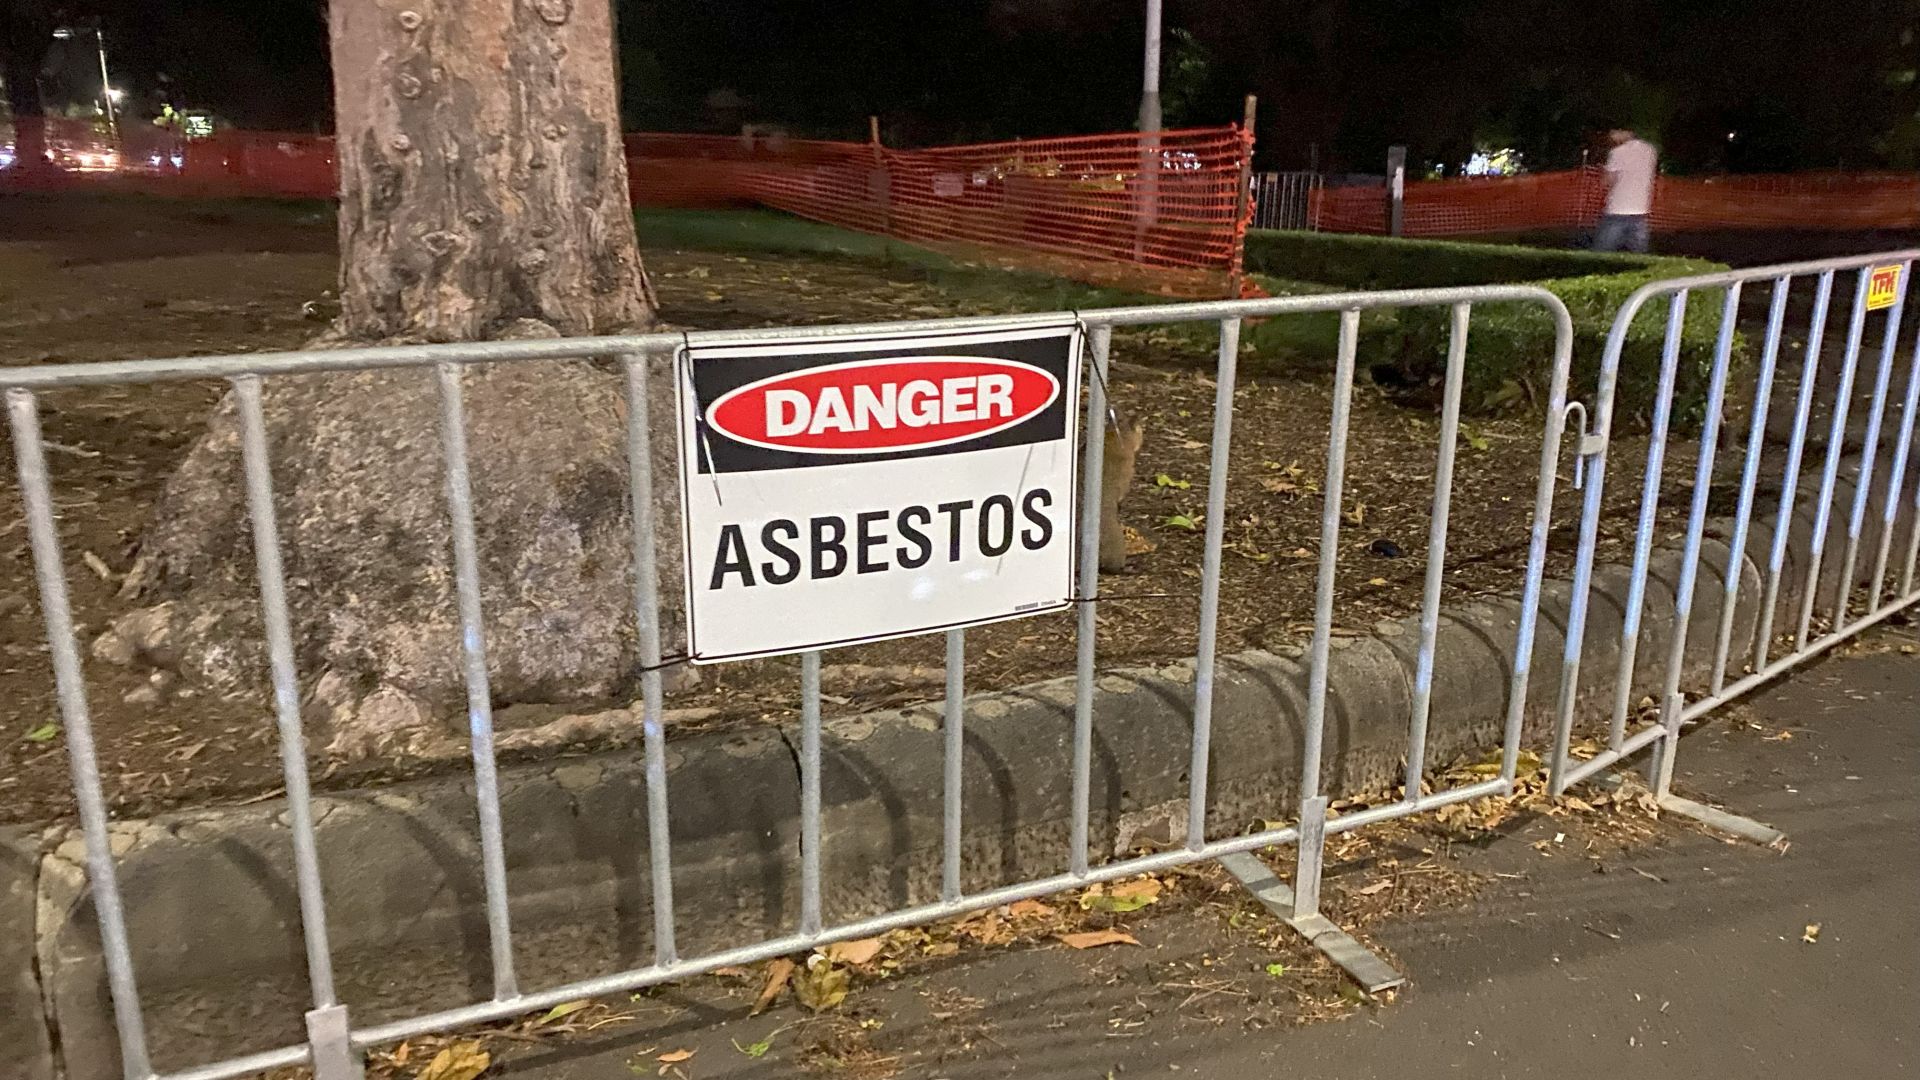 Parks and garden beds around UTS to be tested for asbestos